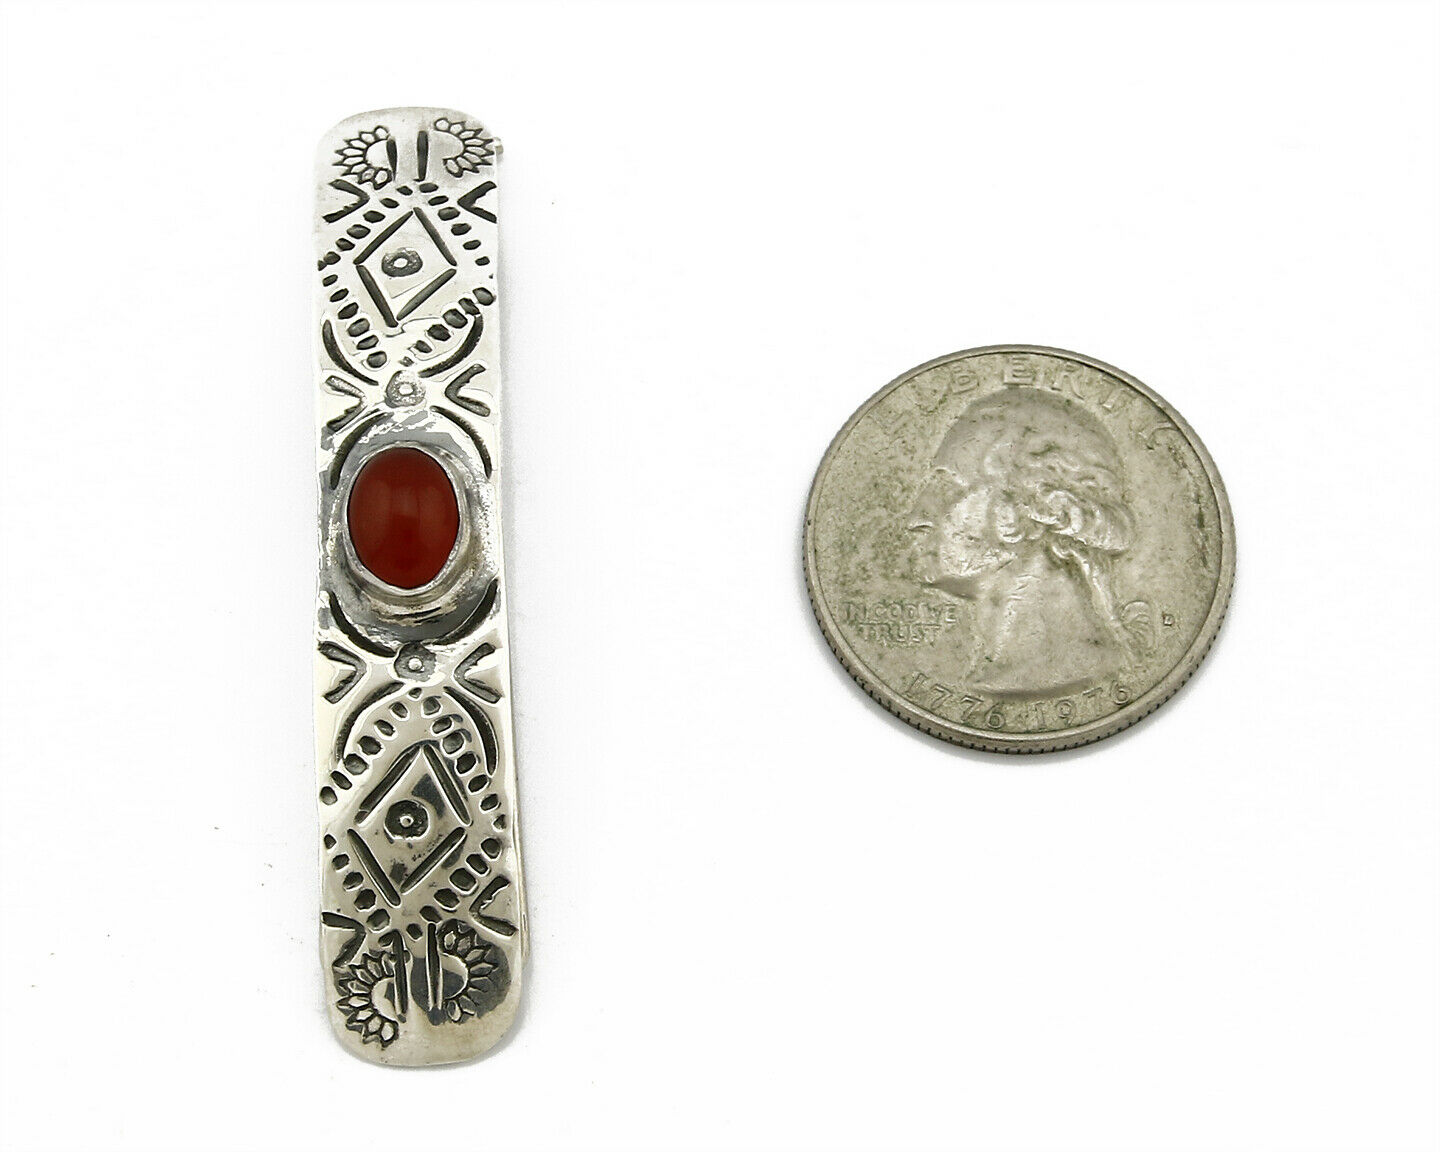 C1990s Navajo Natural Carnelian Agate Hand Stamped 925 Silver Handmade Hair Clip